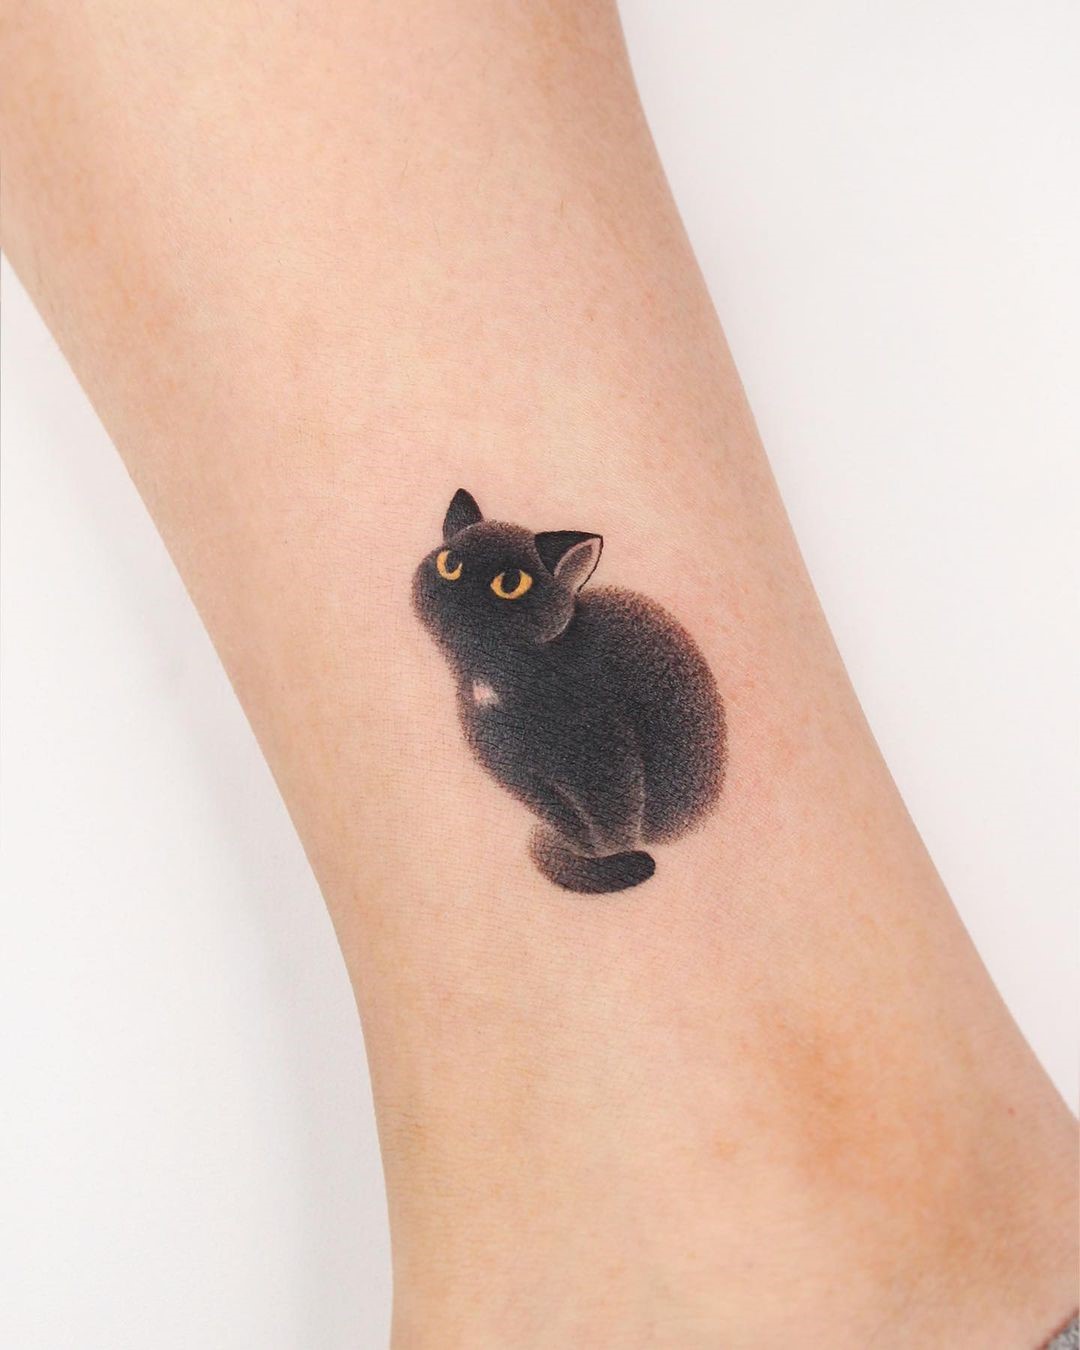 Update more than 87 funny cat tattoos latest - thtantai2